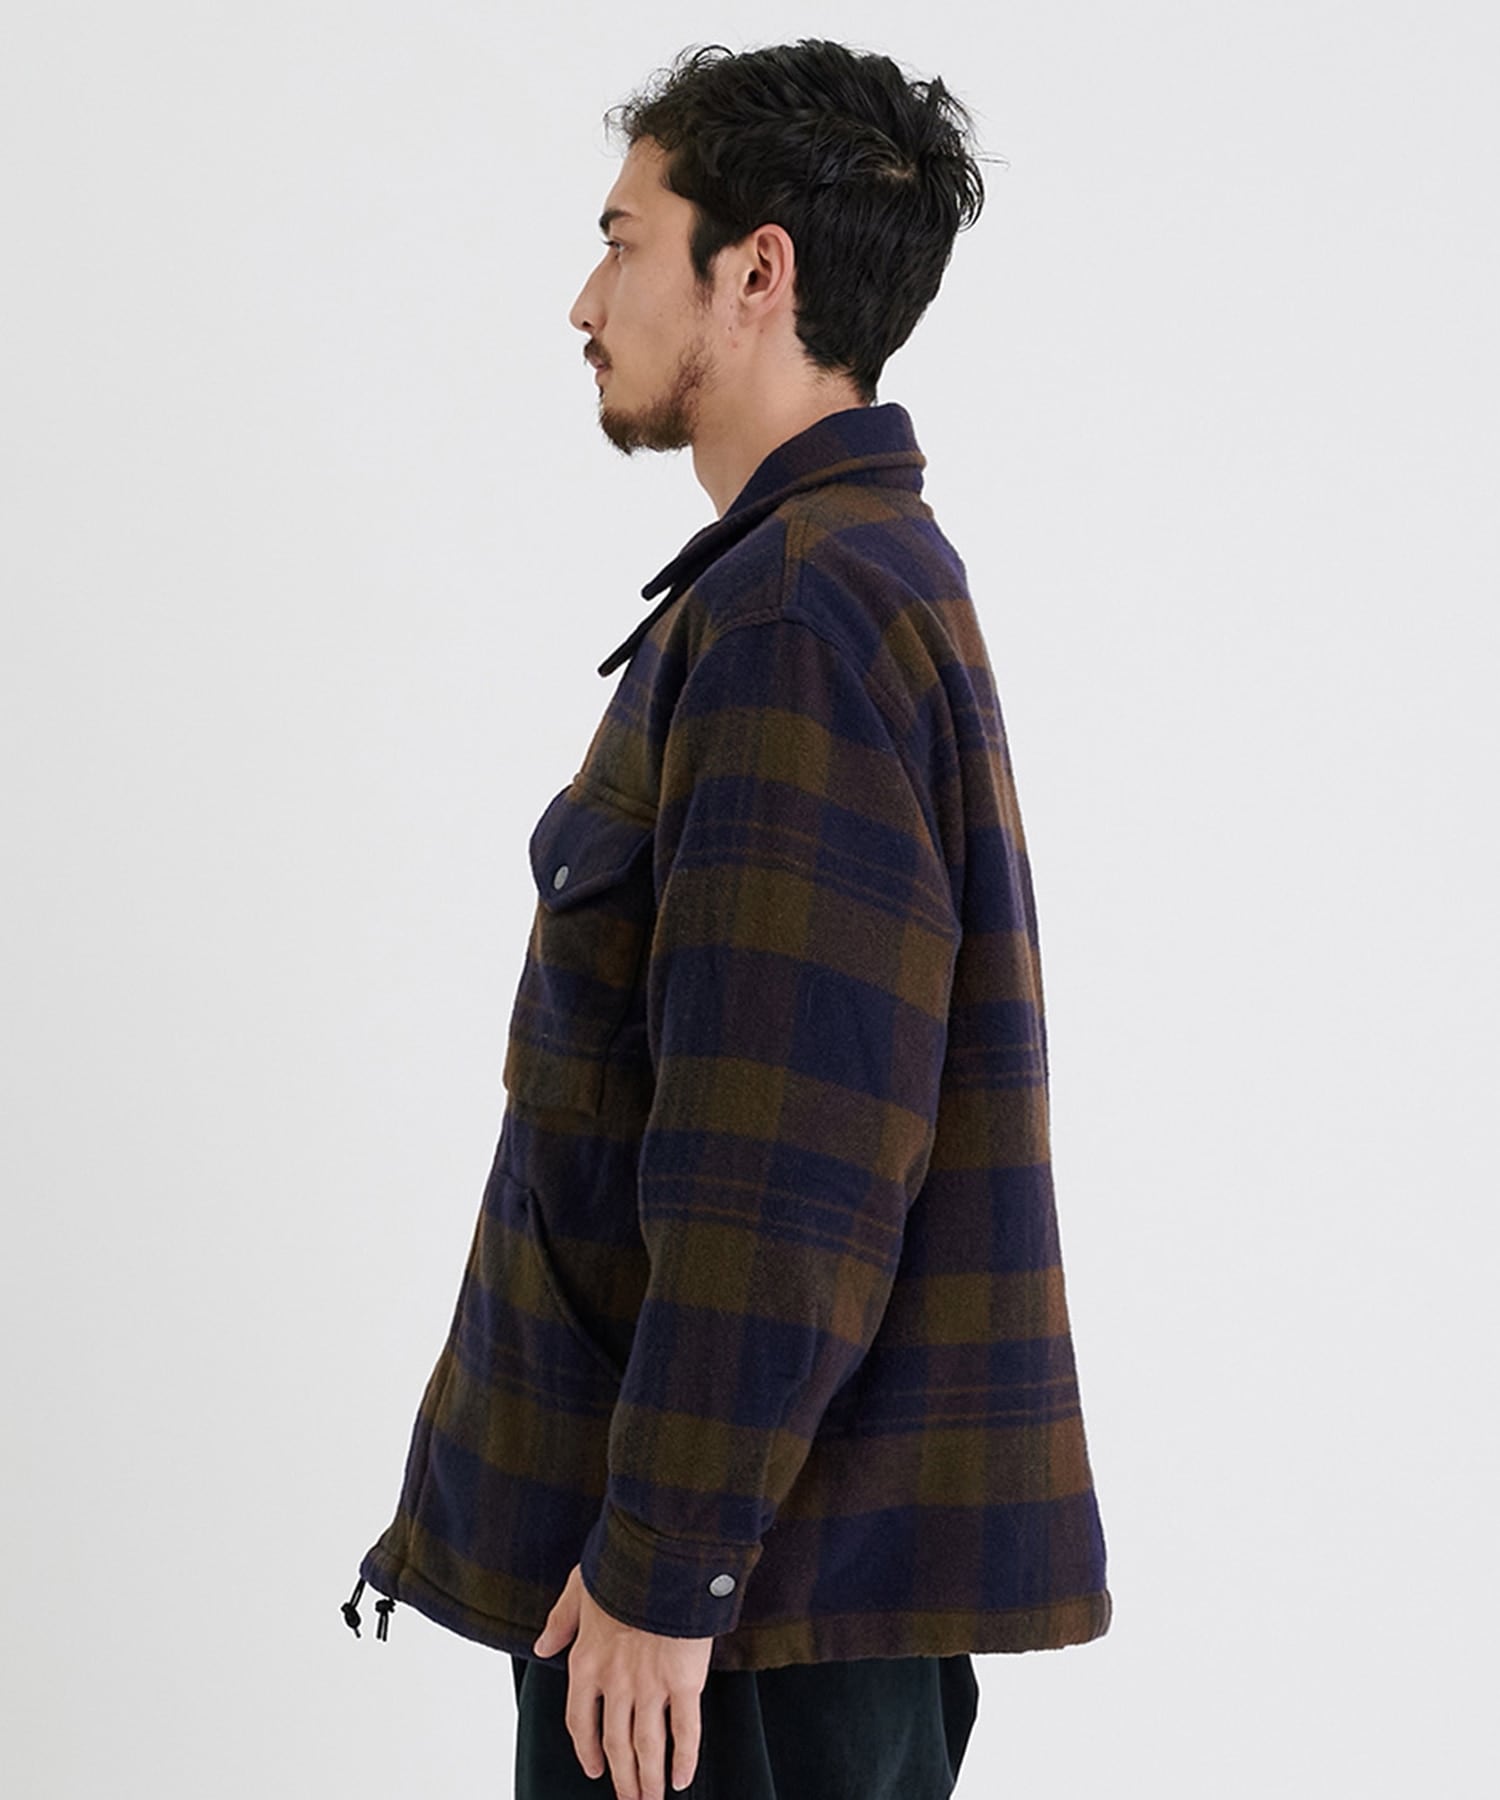 Wool Field CPO Jacket THE NORTH FACE PURPLE LABEL